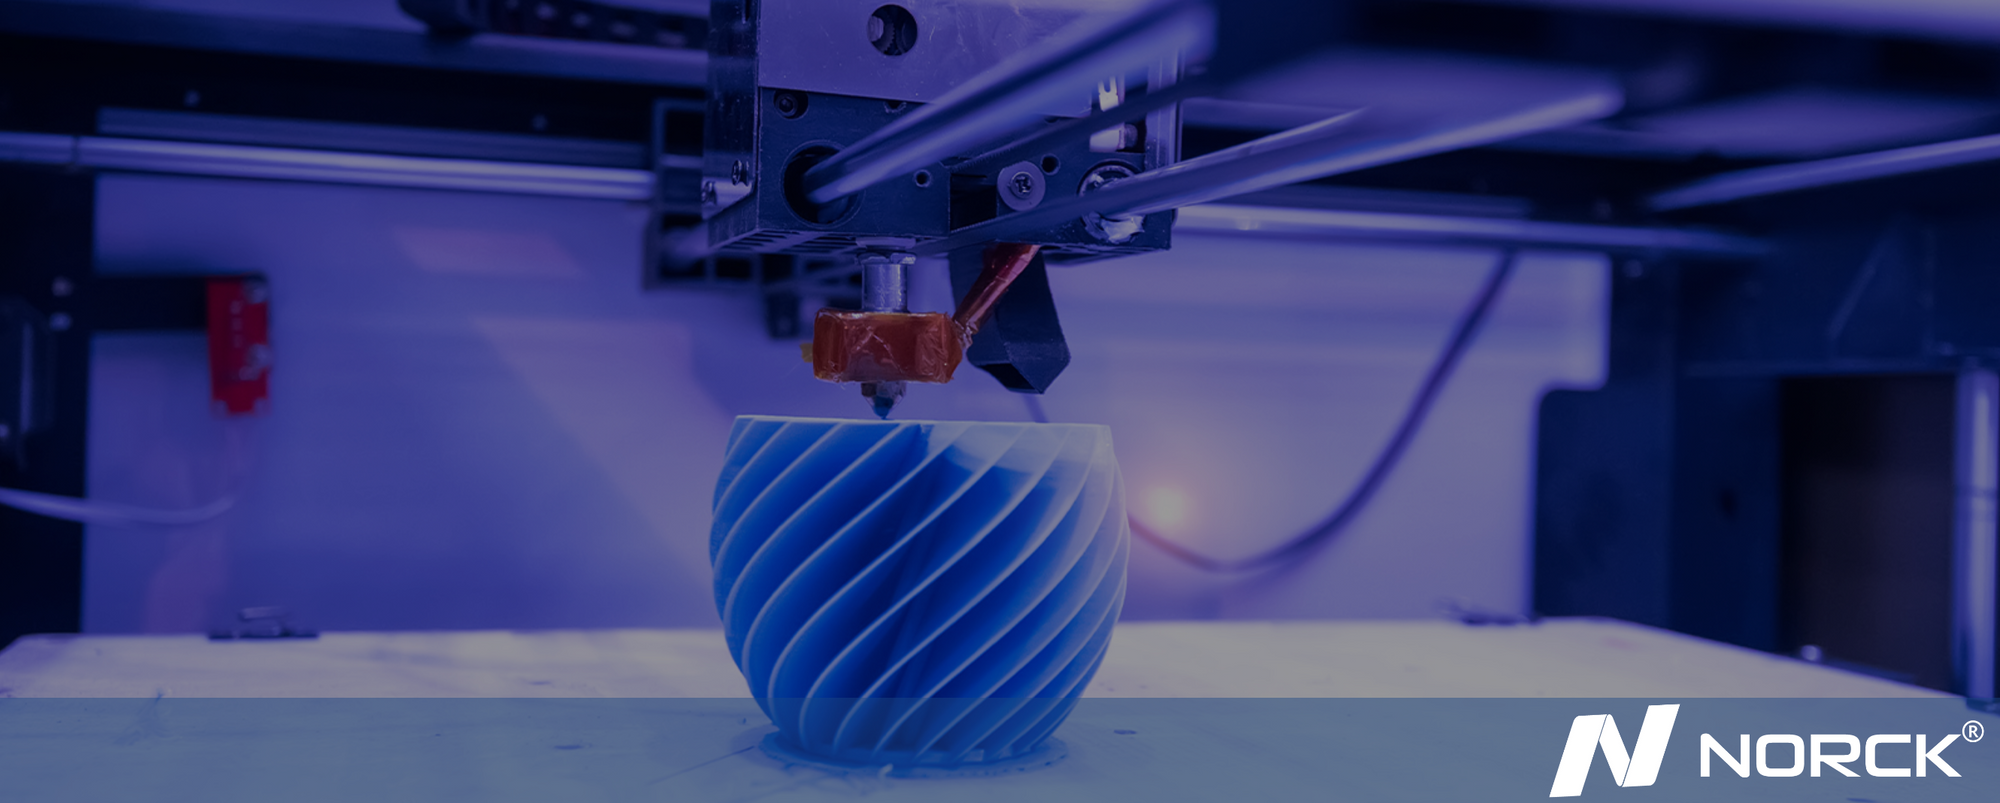 Norck's Advanced 3D Printing Solutions